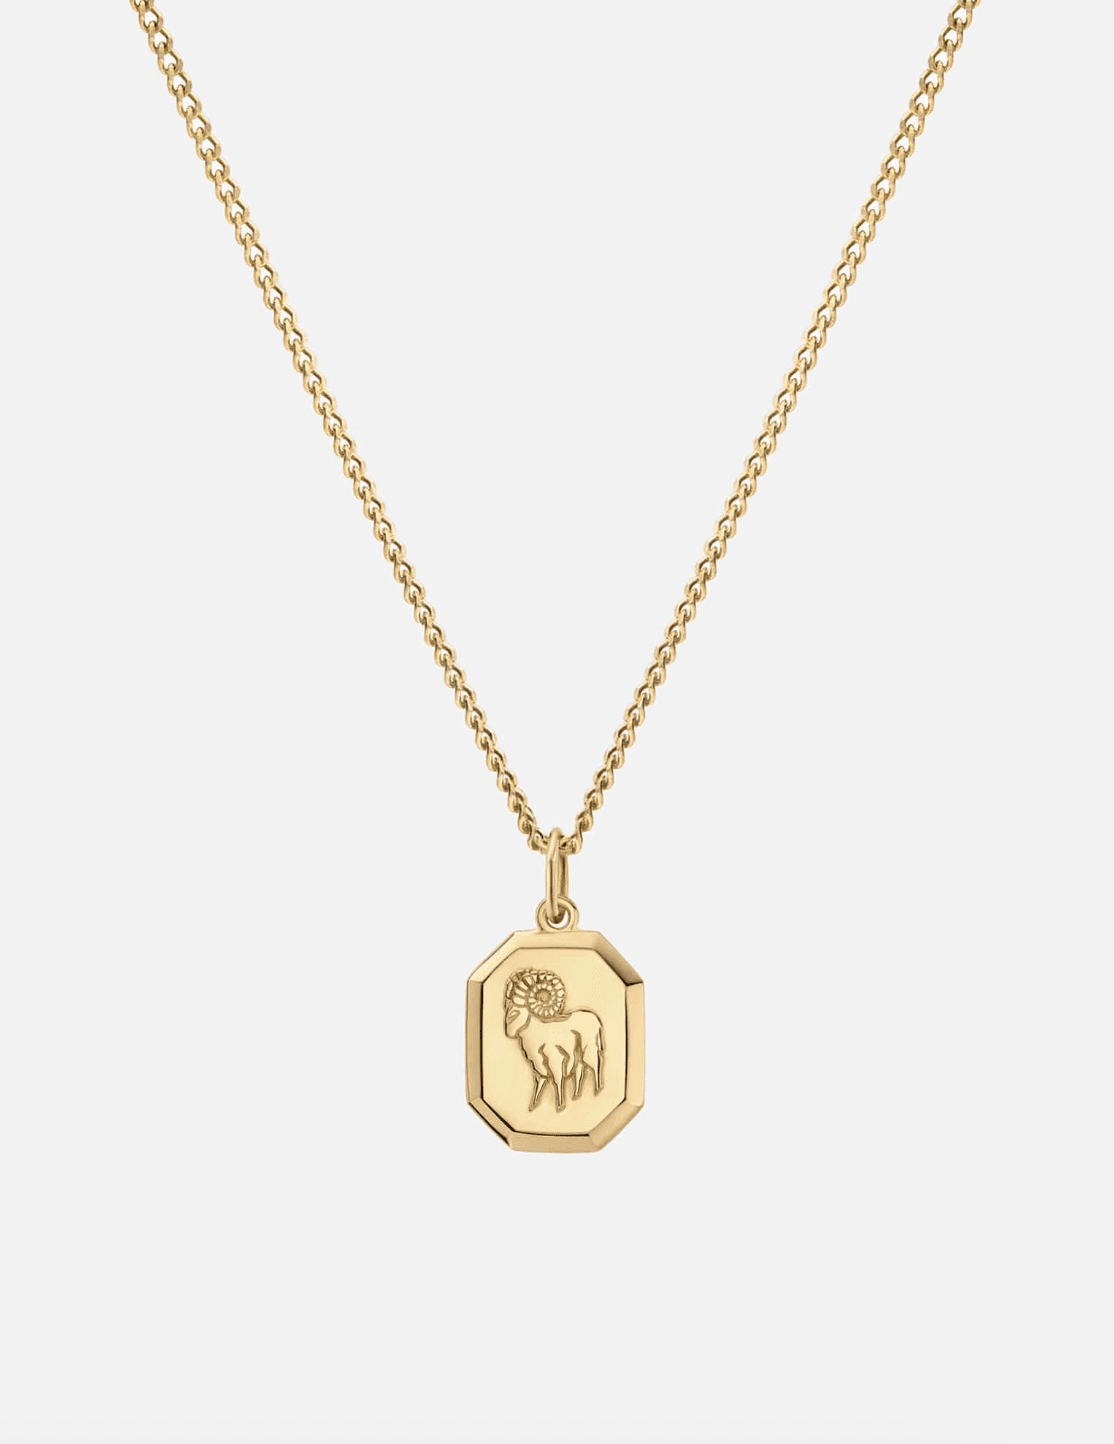 Aries Nyle Pendant Necklace by Miansai - Haven